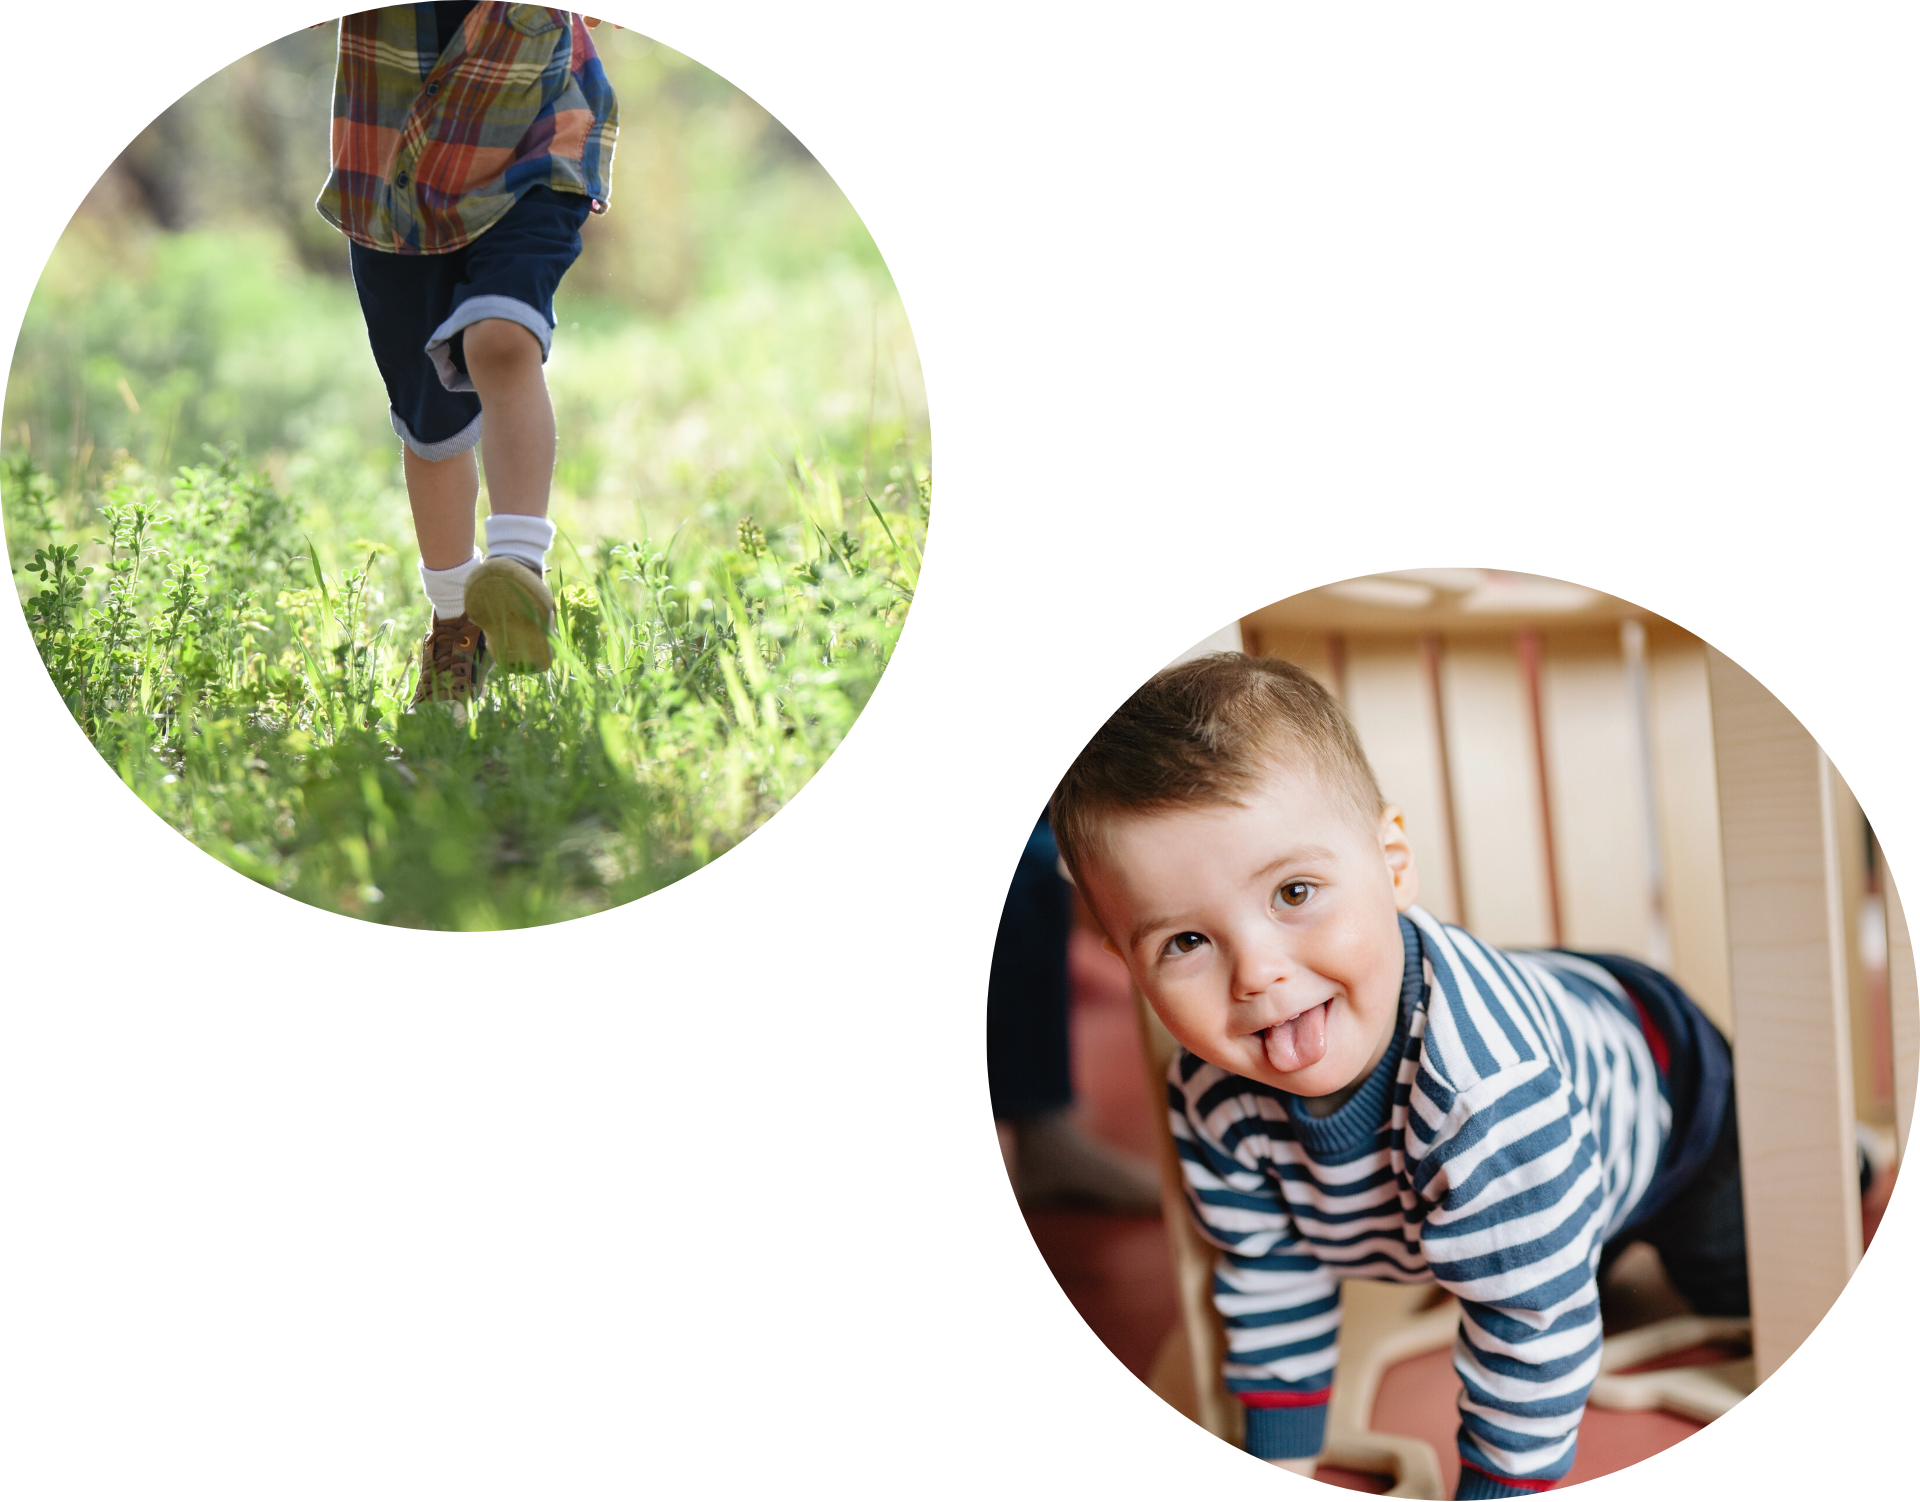 Two circular images show a young crawling boy who plays indoors as well as the body of a young boy running in the grass.